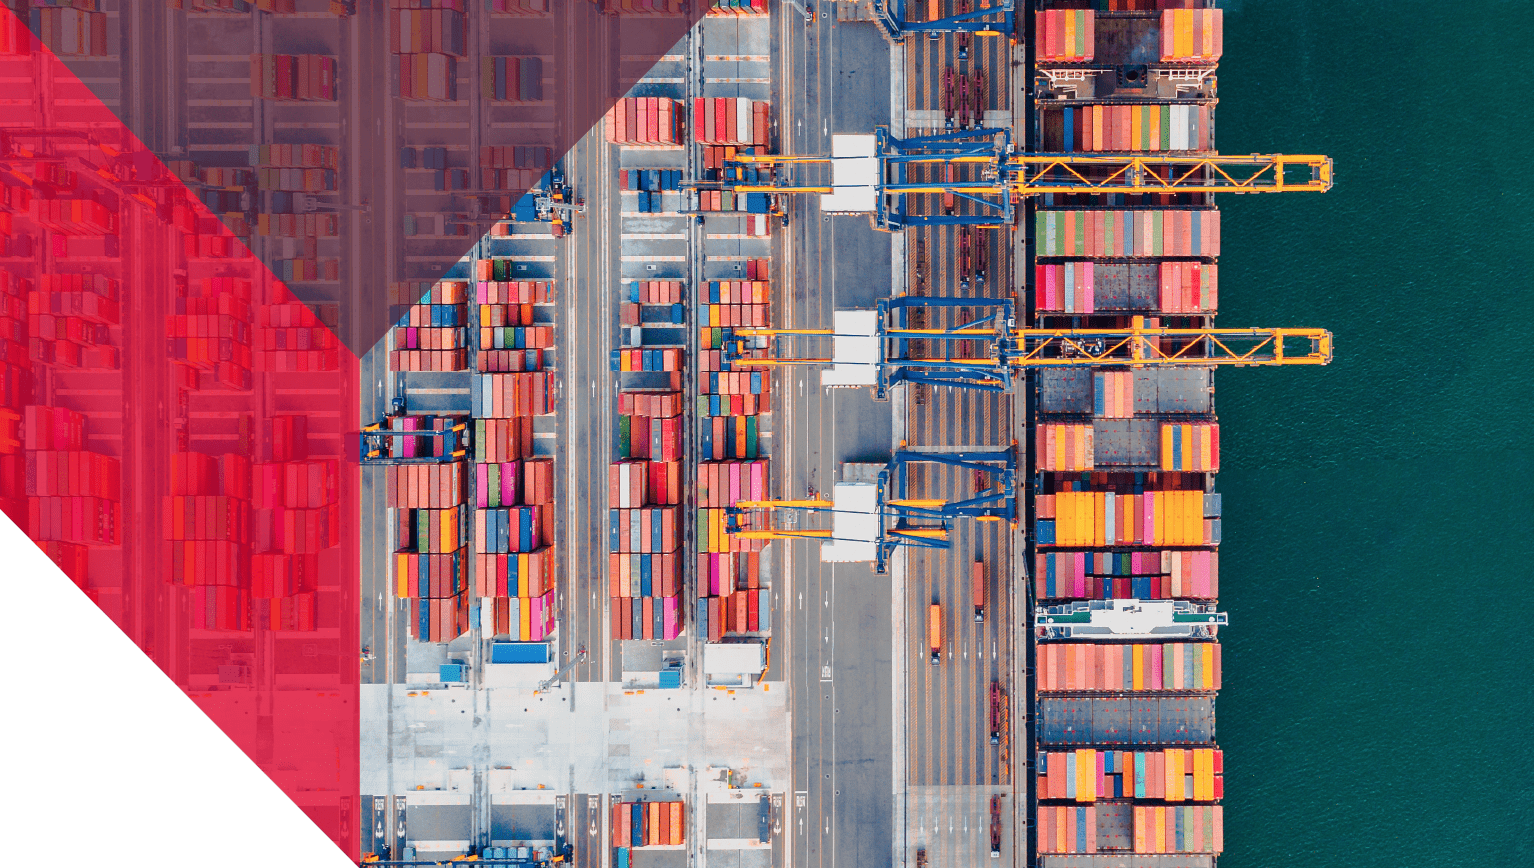 Ariel view of colorful storage crates on ocean liner to represent market trends.